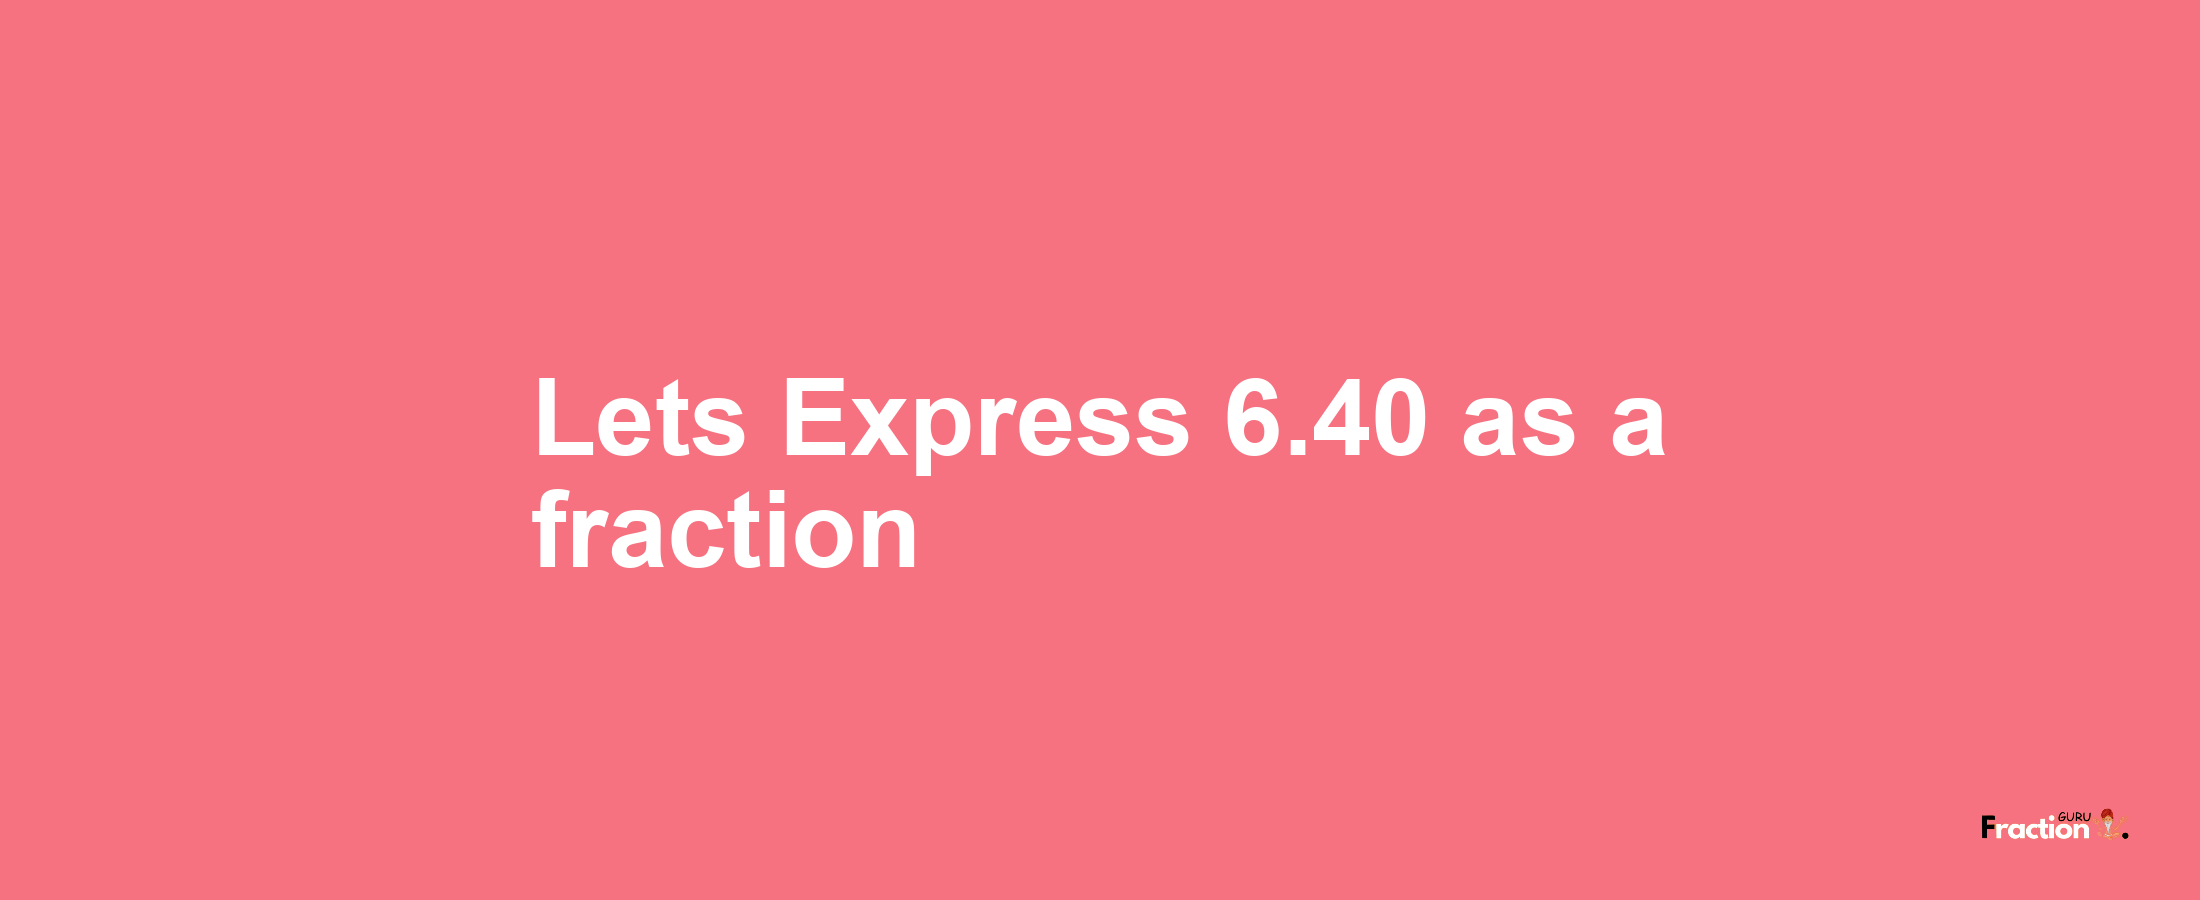 Lets Express 6.40 as afraction